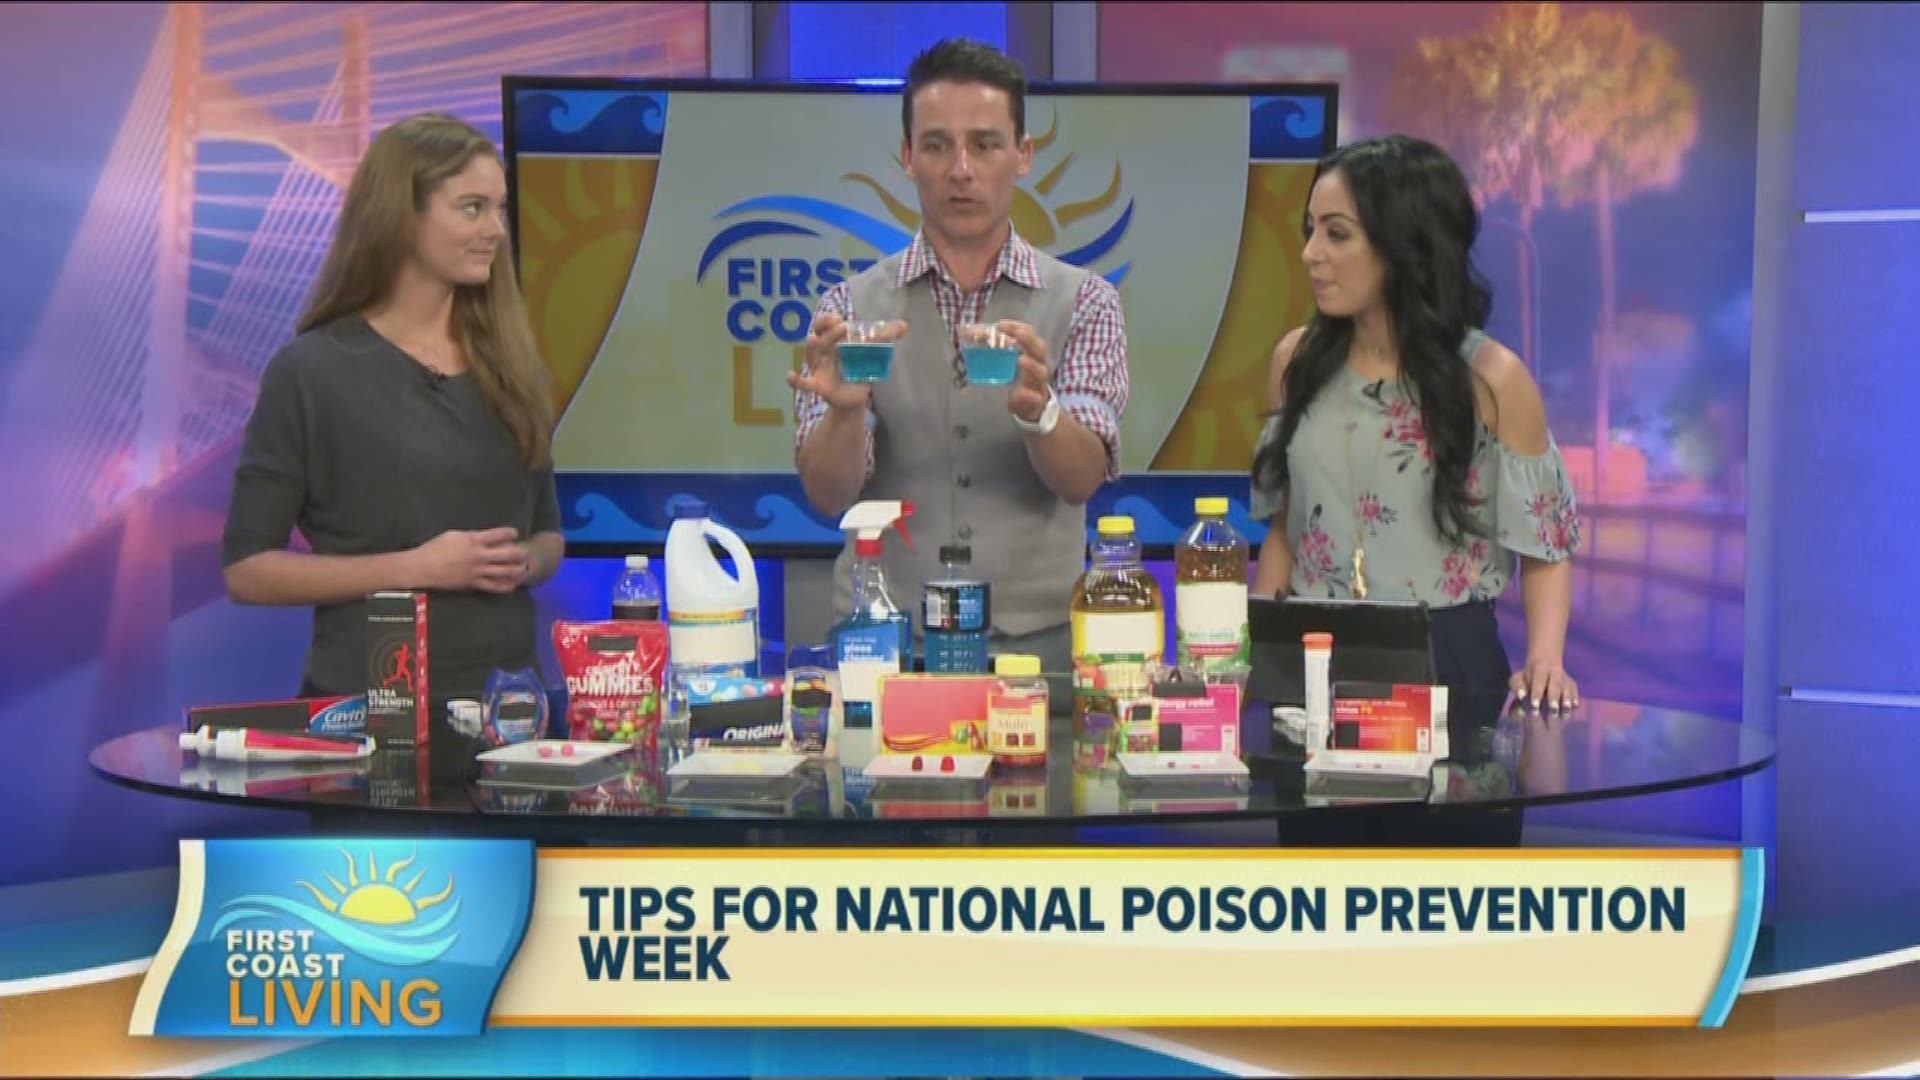 Florida Poison Control stops by to share tips you need to know for National Poison Prevention Week.